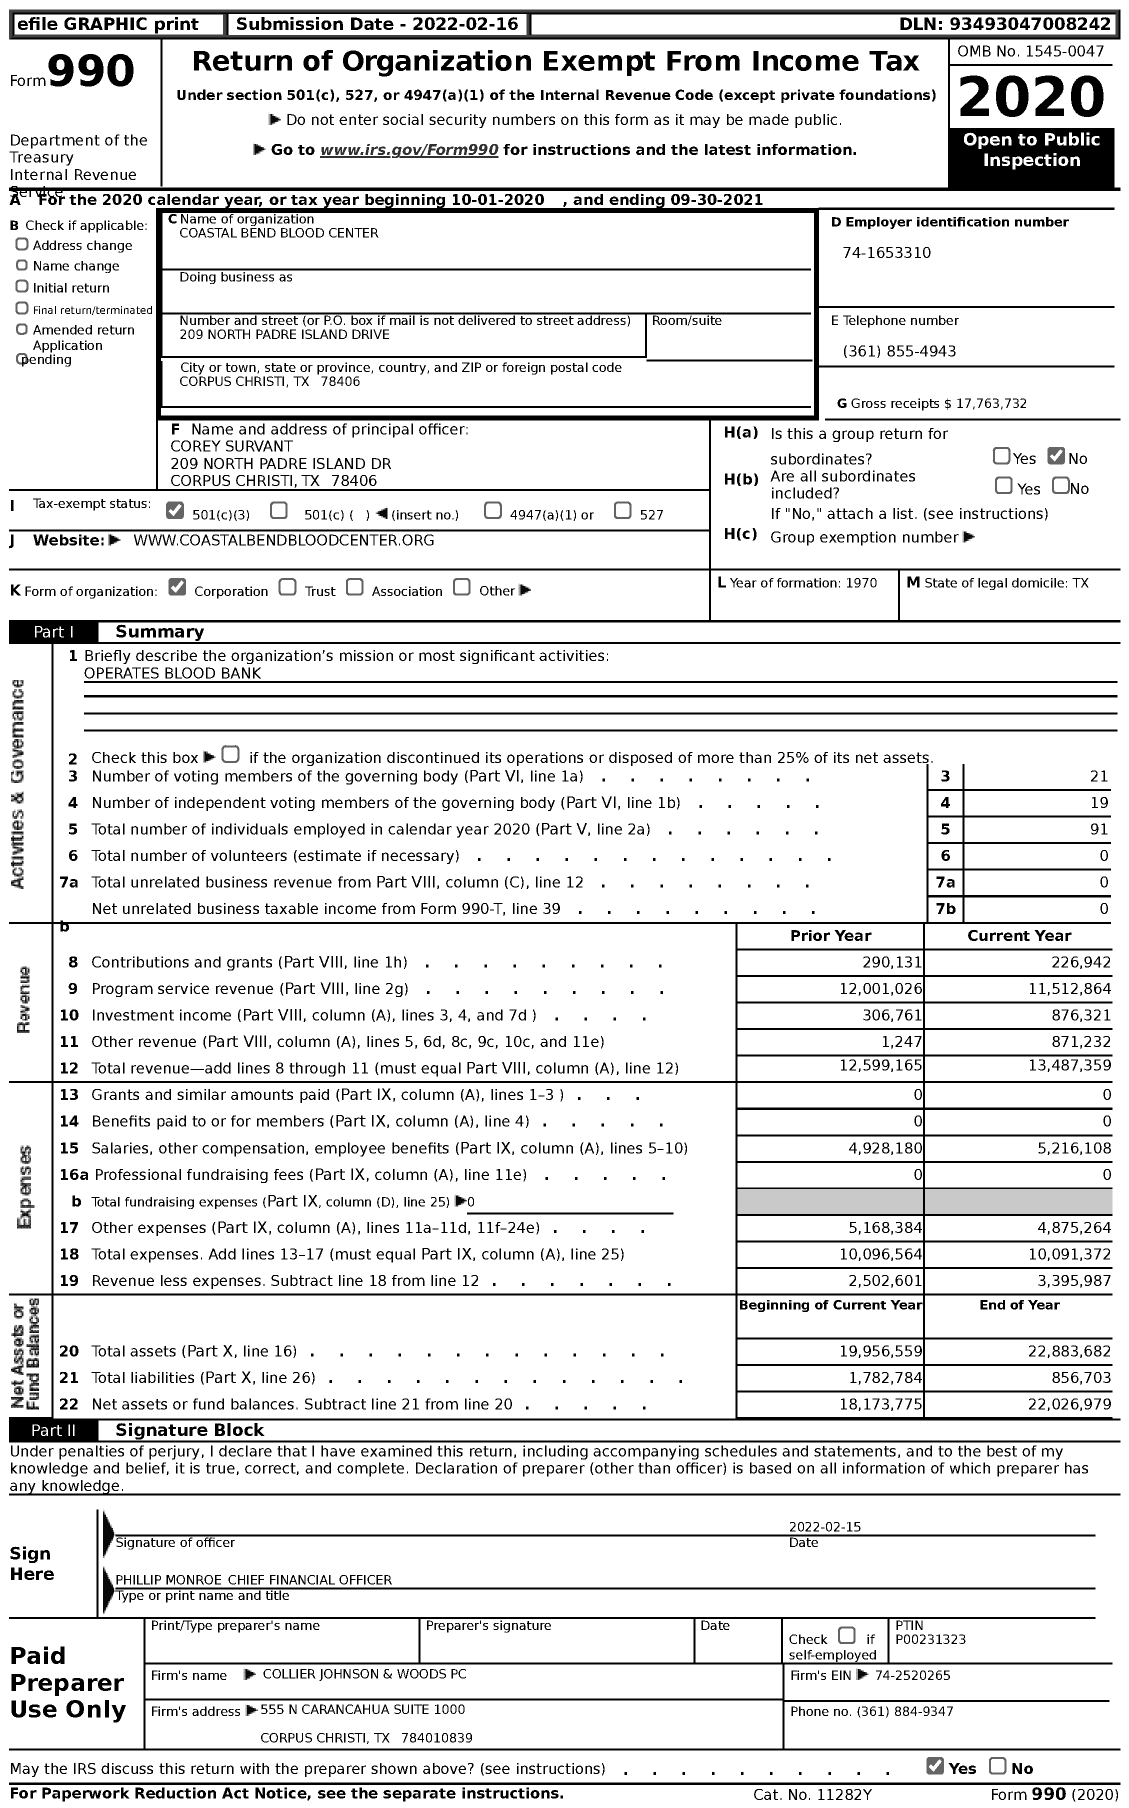 Image of first page of 2020 Form 990 for Coastal Bend Blood Center